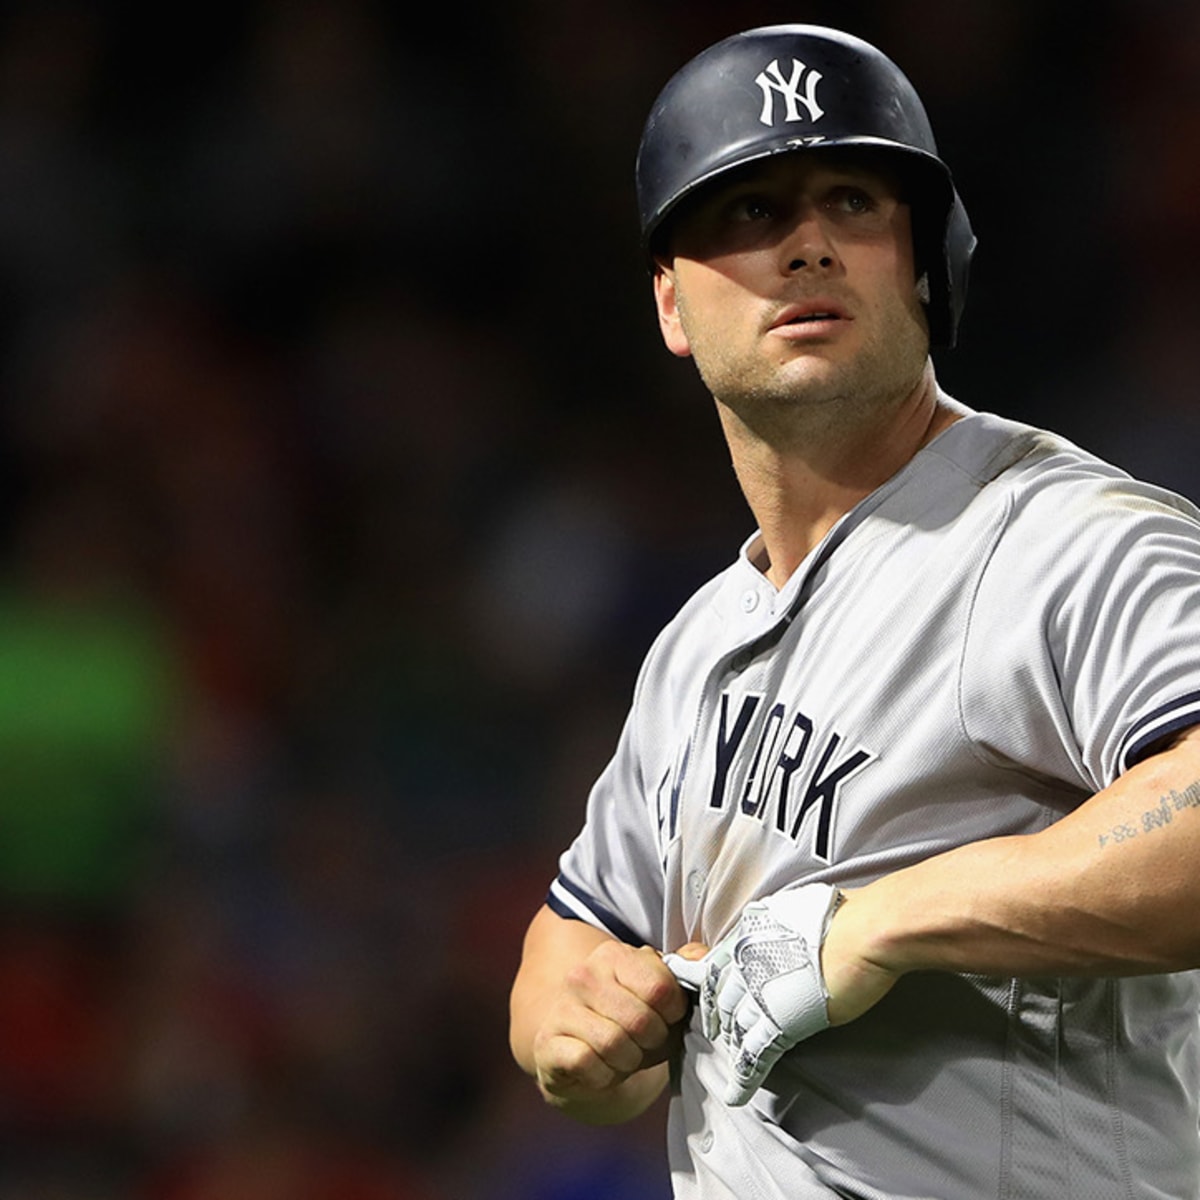 Matt Holliday's Potential as a Franchise Quarterback - Sports Illustrated